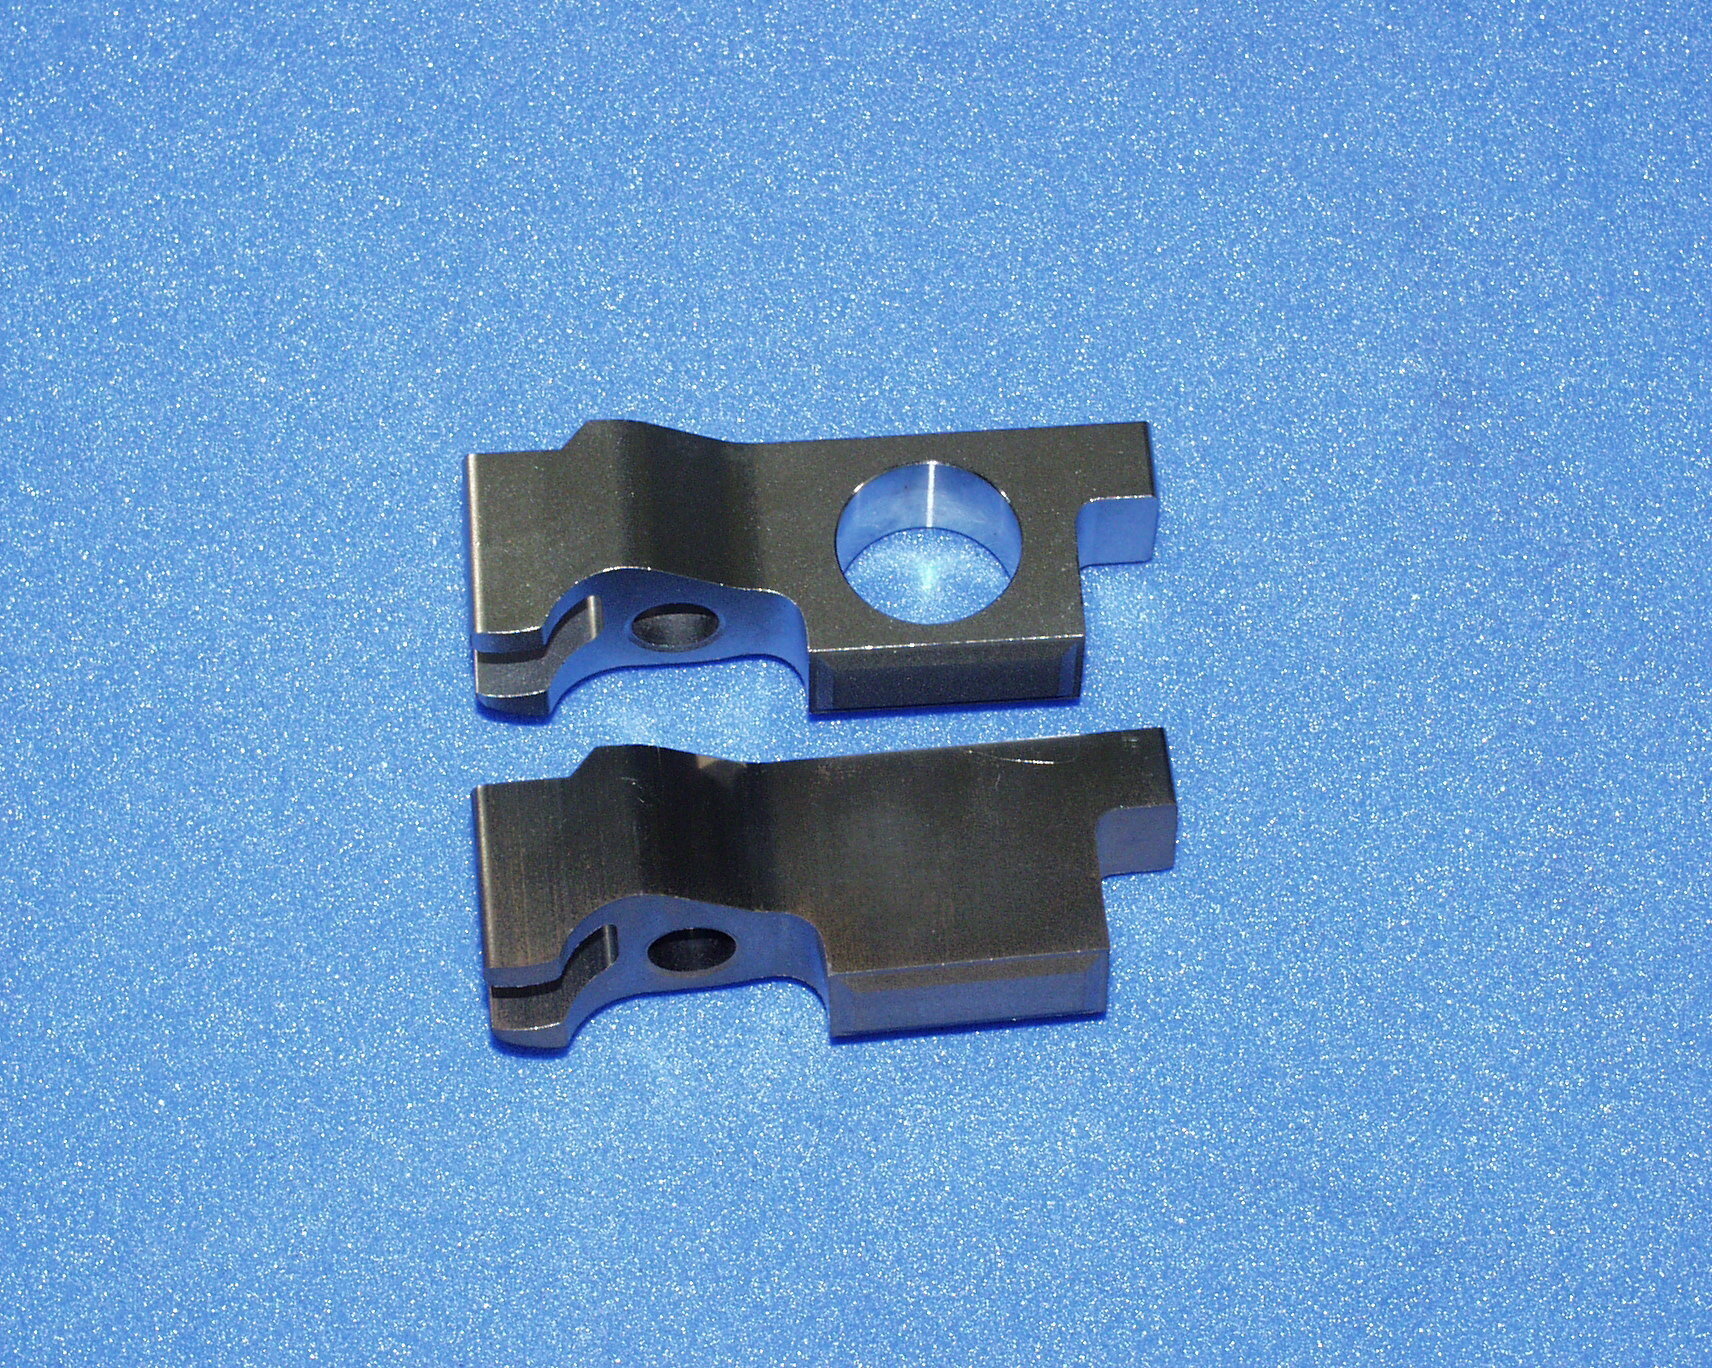 Green machining of clamps and nozzle holders